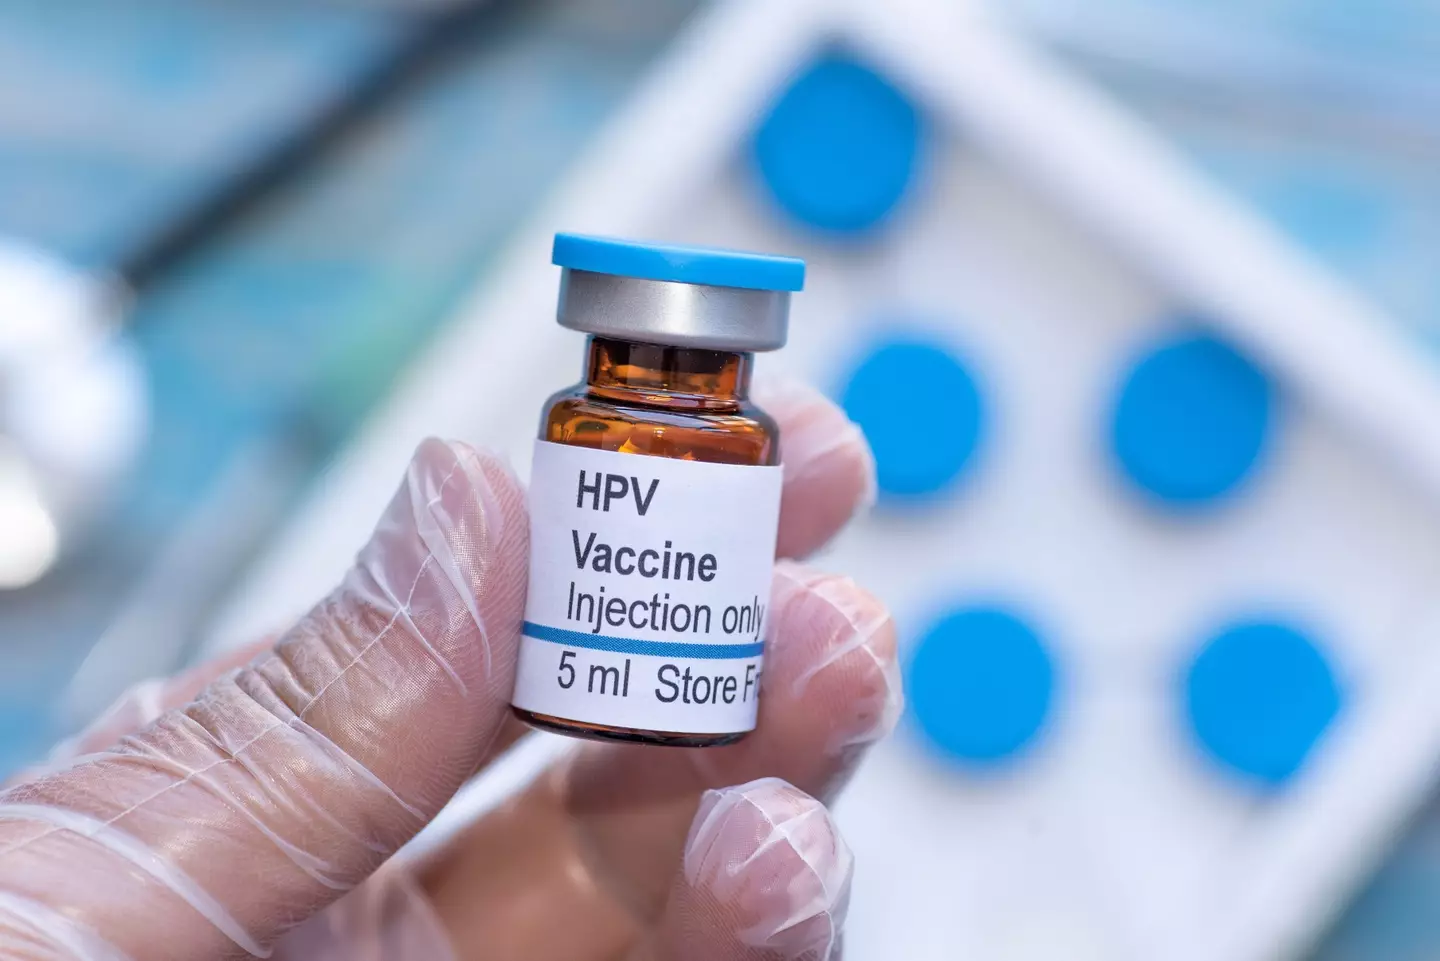 Another way to help prevent cervical cancer is to be vaccinated against the HPV virus.